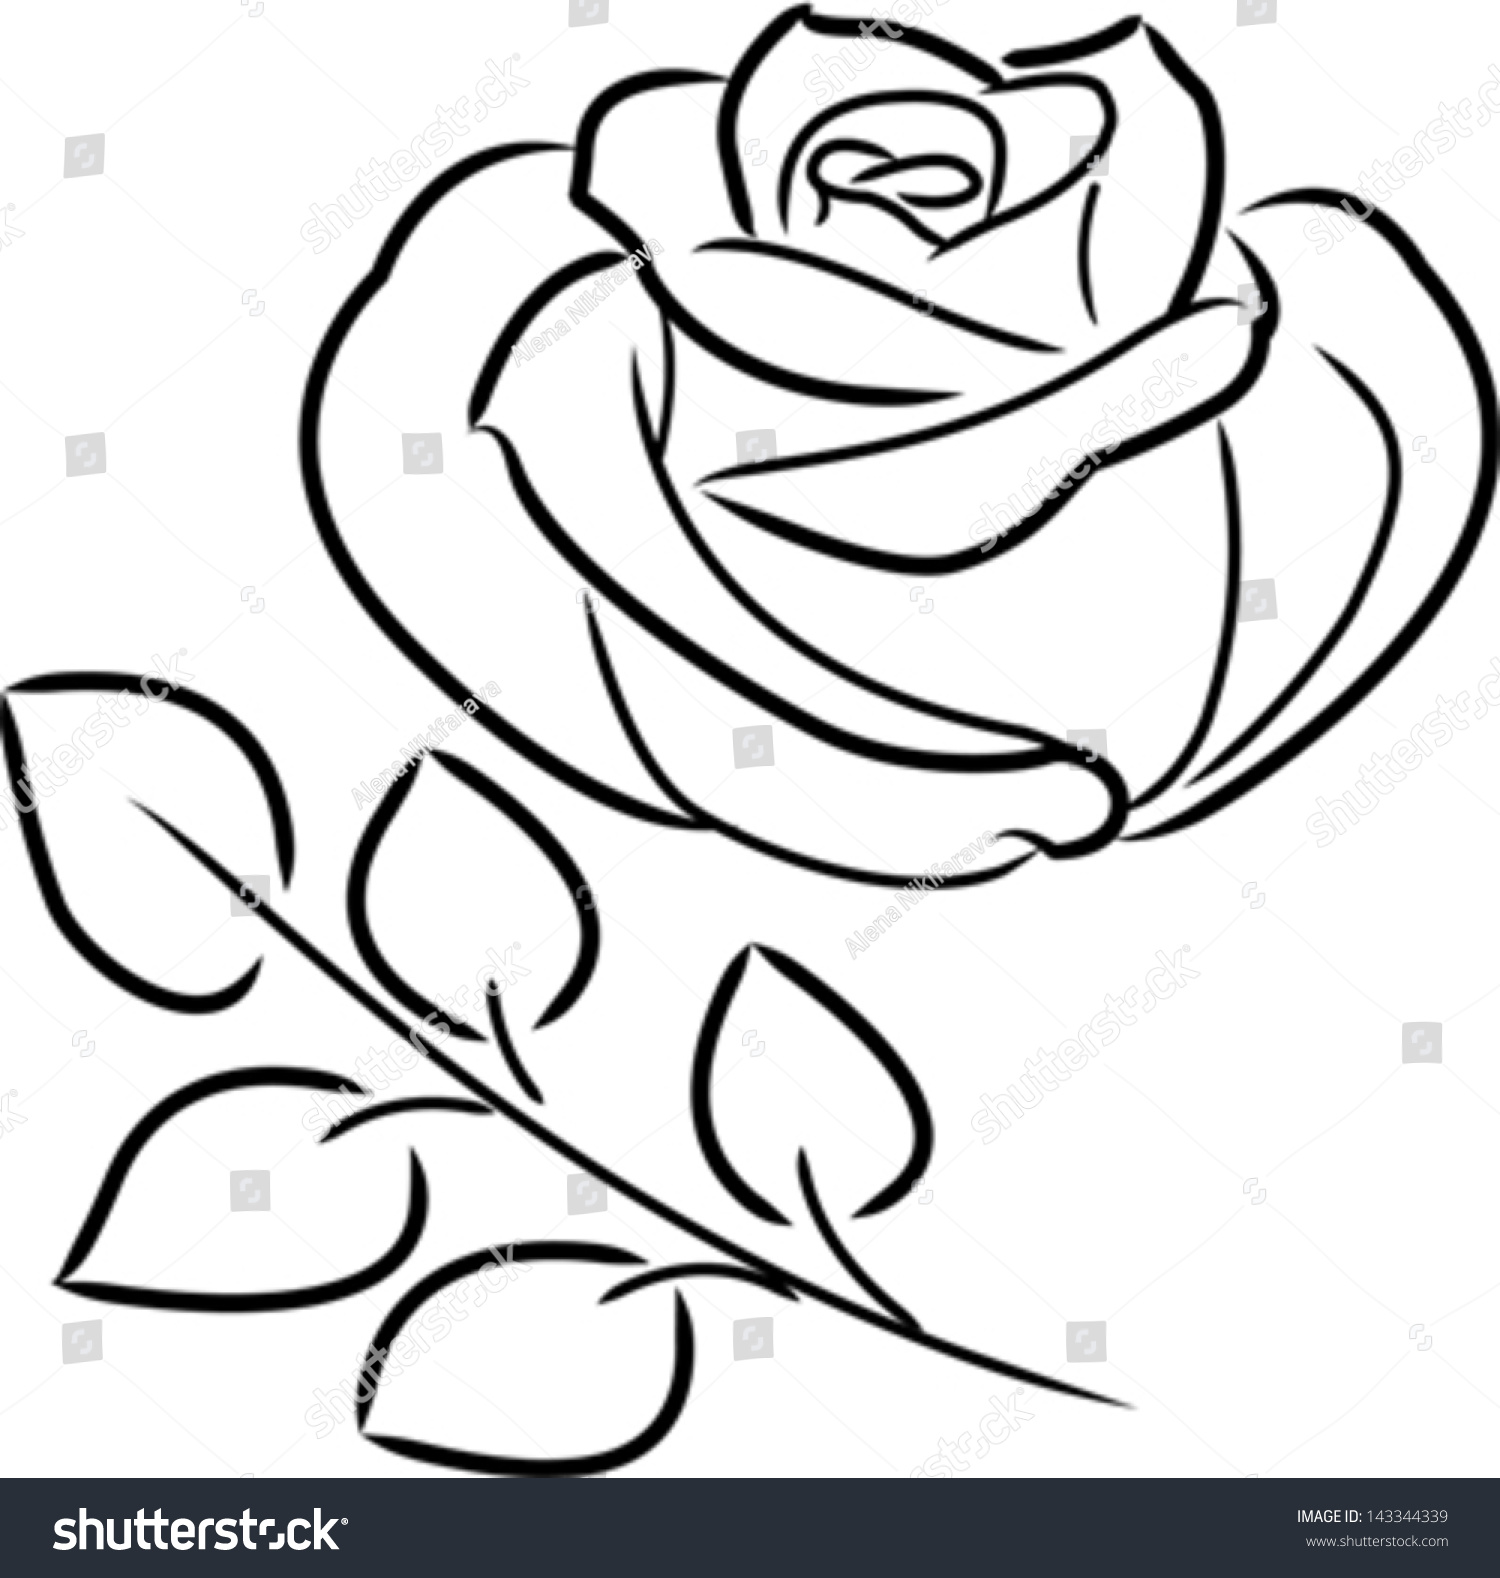 clipart rose outline - photo #47